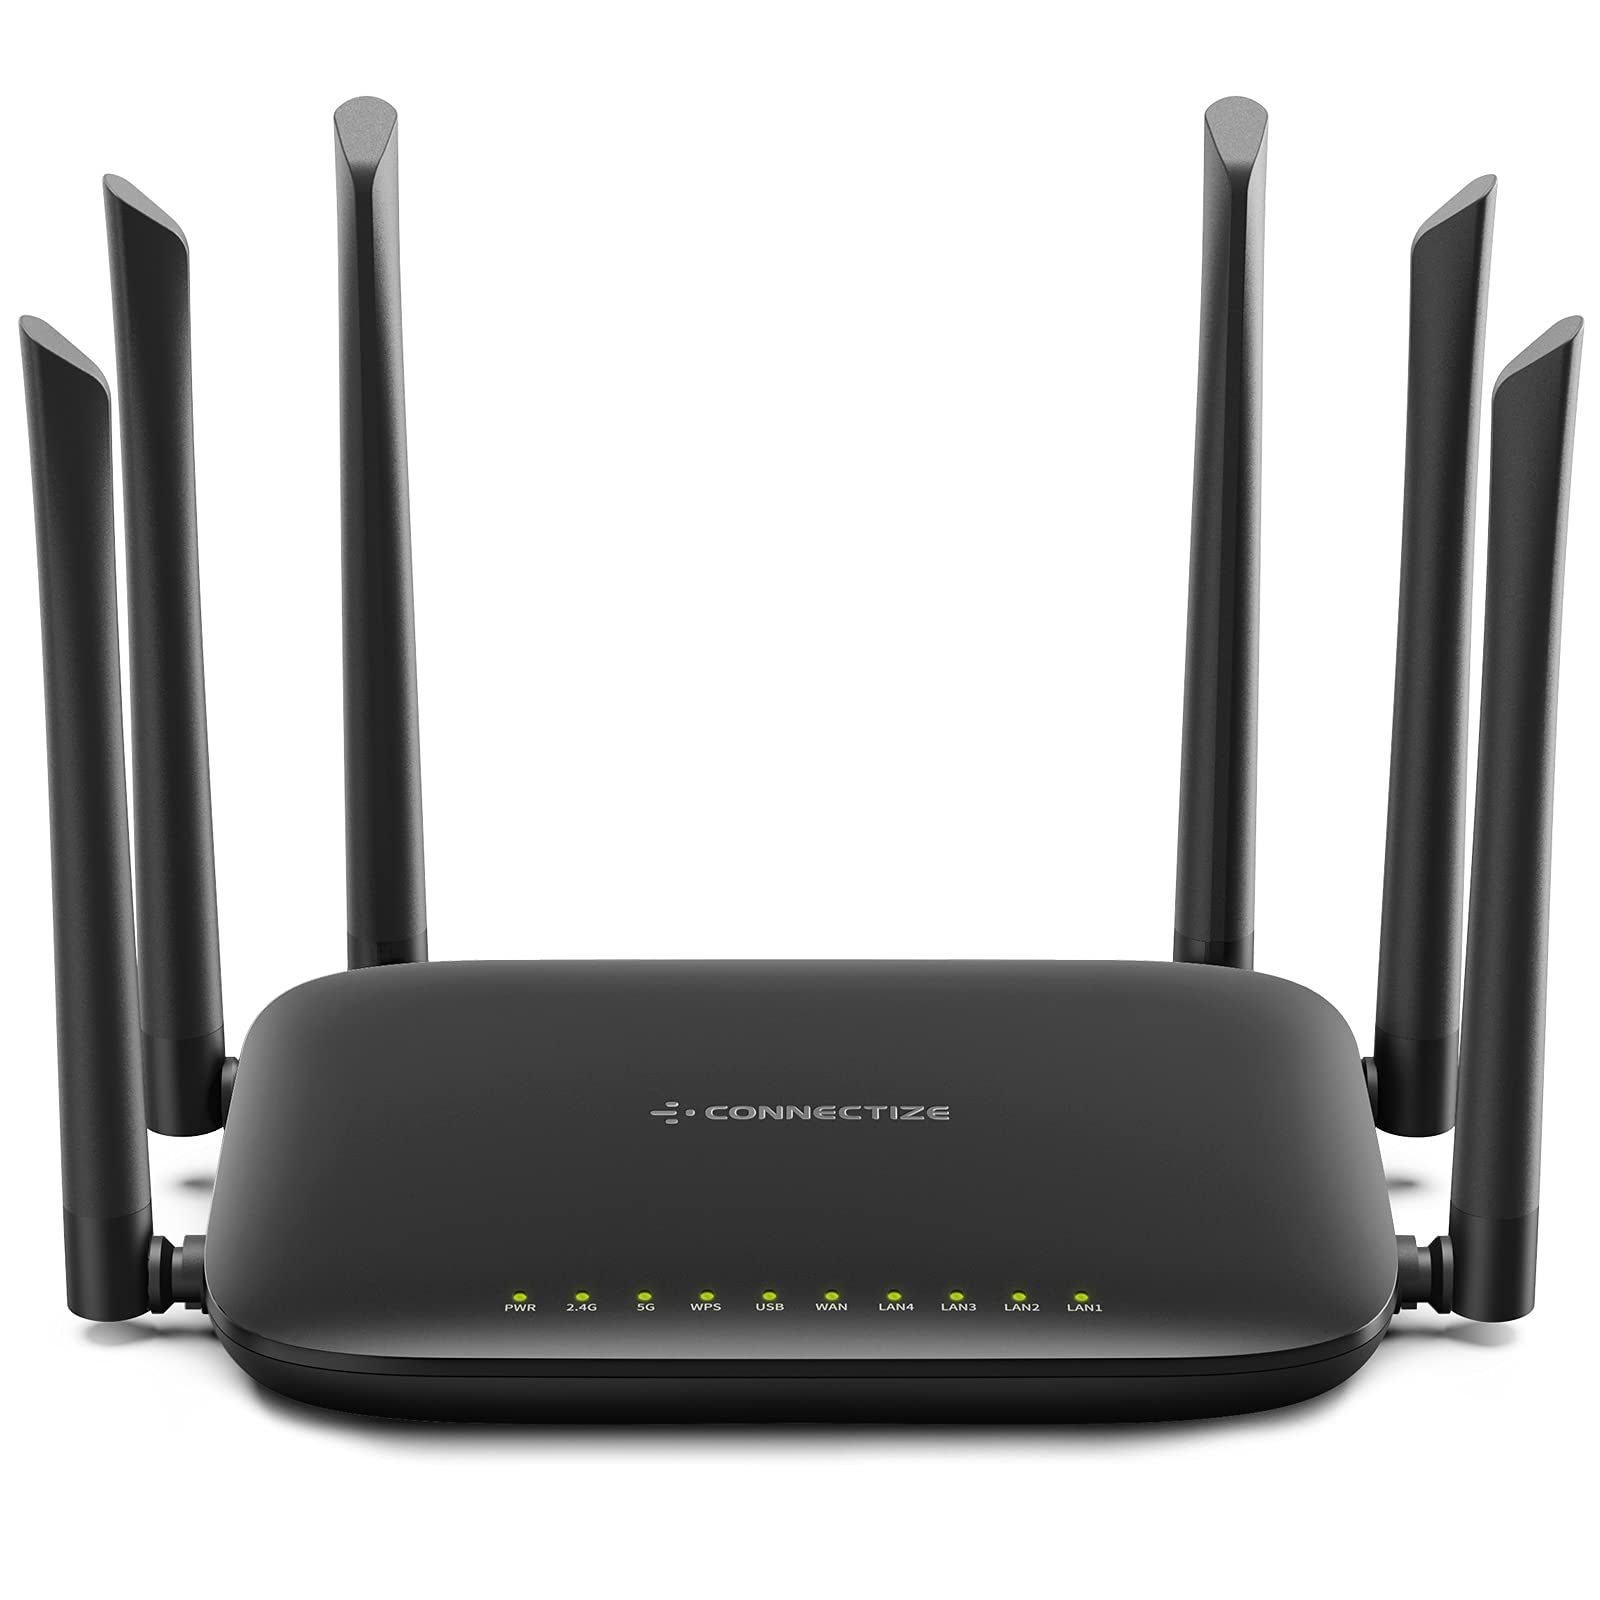 montering Manners Undskyld mig connectize G6 gigabit WiFi Router, Ac2100 Dual Band High Speed Wireless  Router for Home & gaming, 6 Antennas, MU-MIMO for Superb 2300 SqFt cov